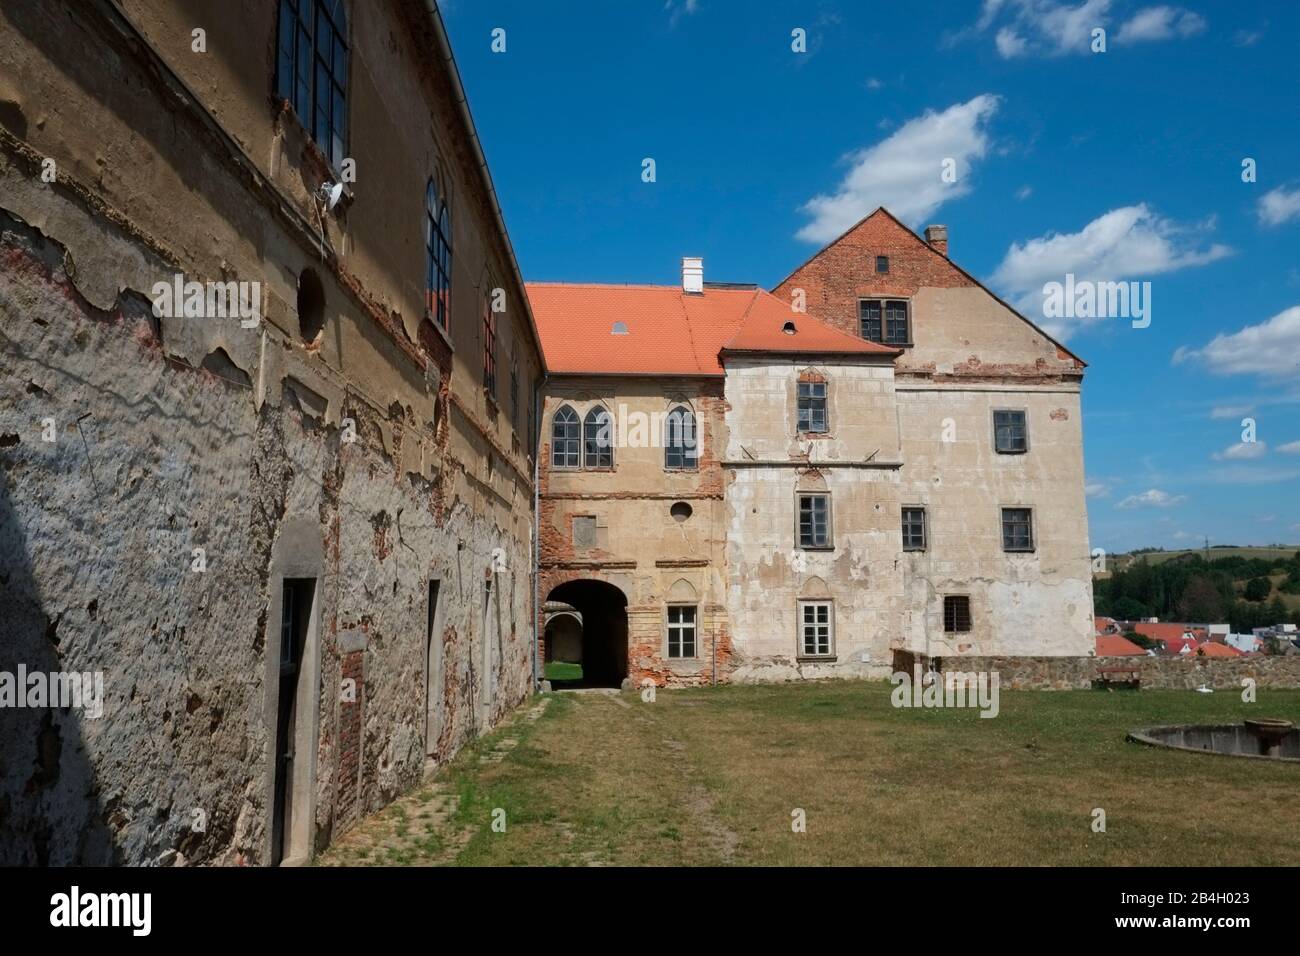 Brtnice Castle, confiscated from its owners in 1945 by, so called Benes decrees, this Gothic castle is in dilapidated condition without repair, Czech Republic Stock Photo